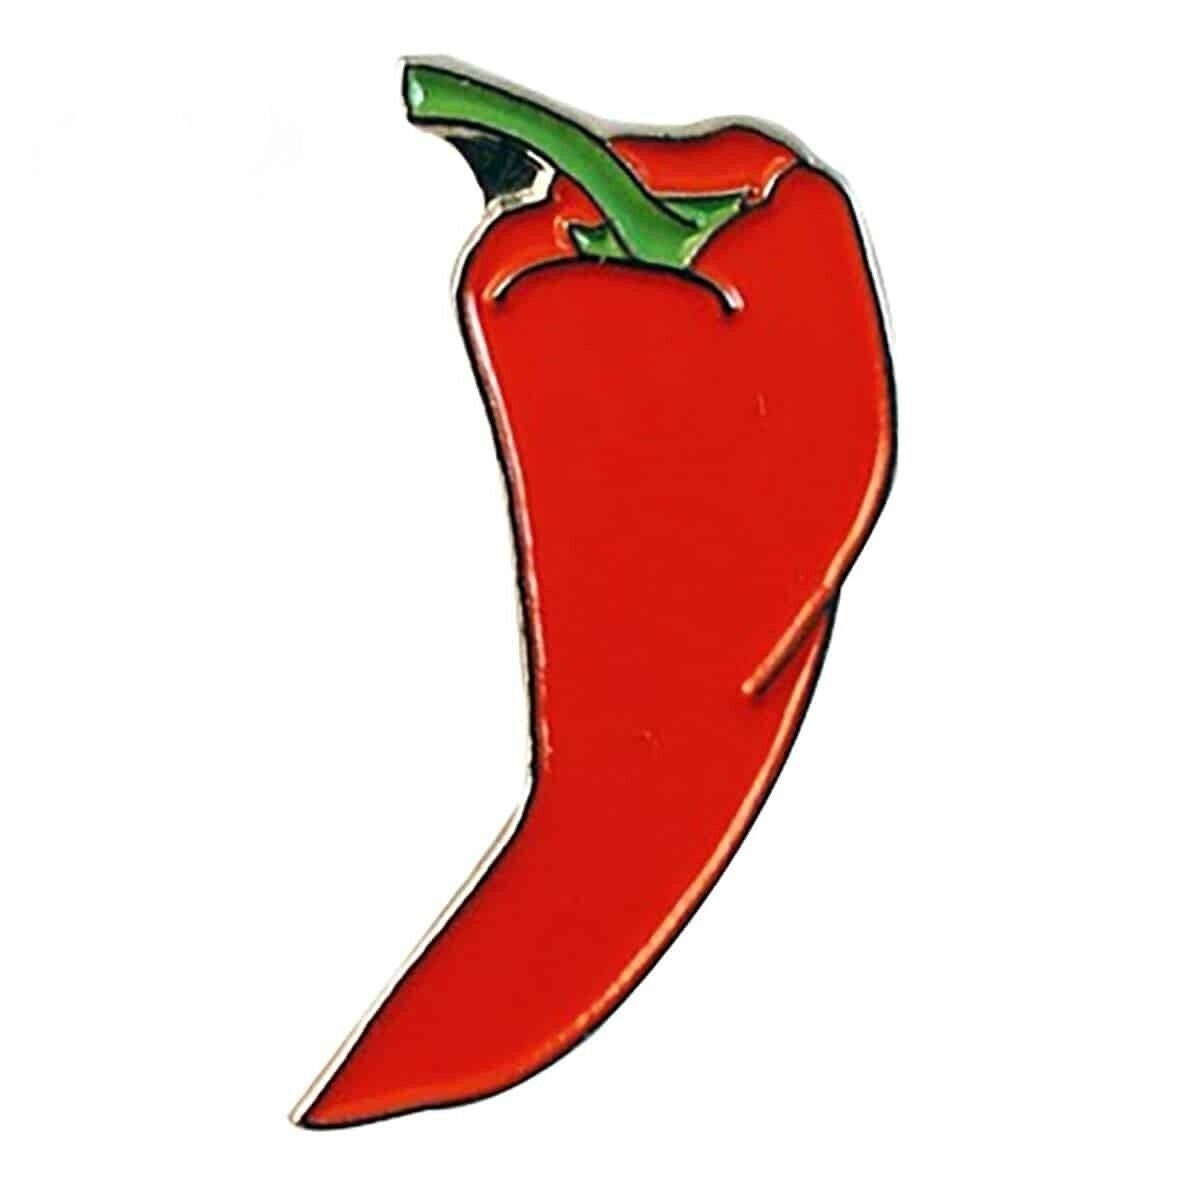 RHCP Enamel Pin Set – Red Hot Chili Peppers